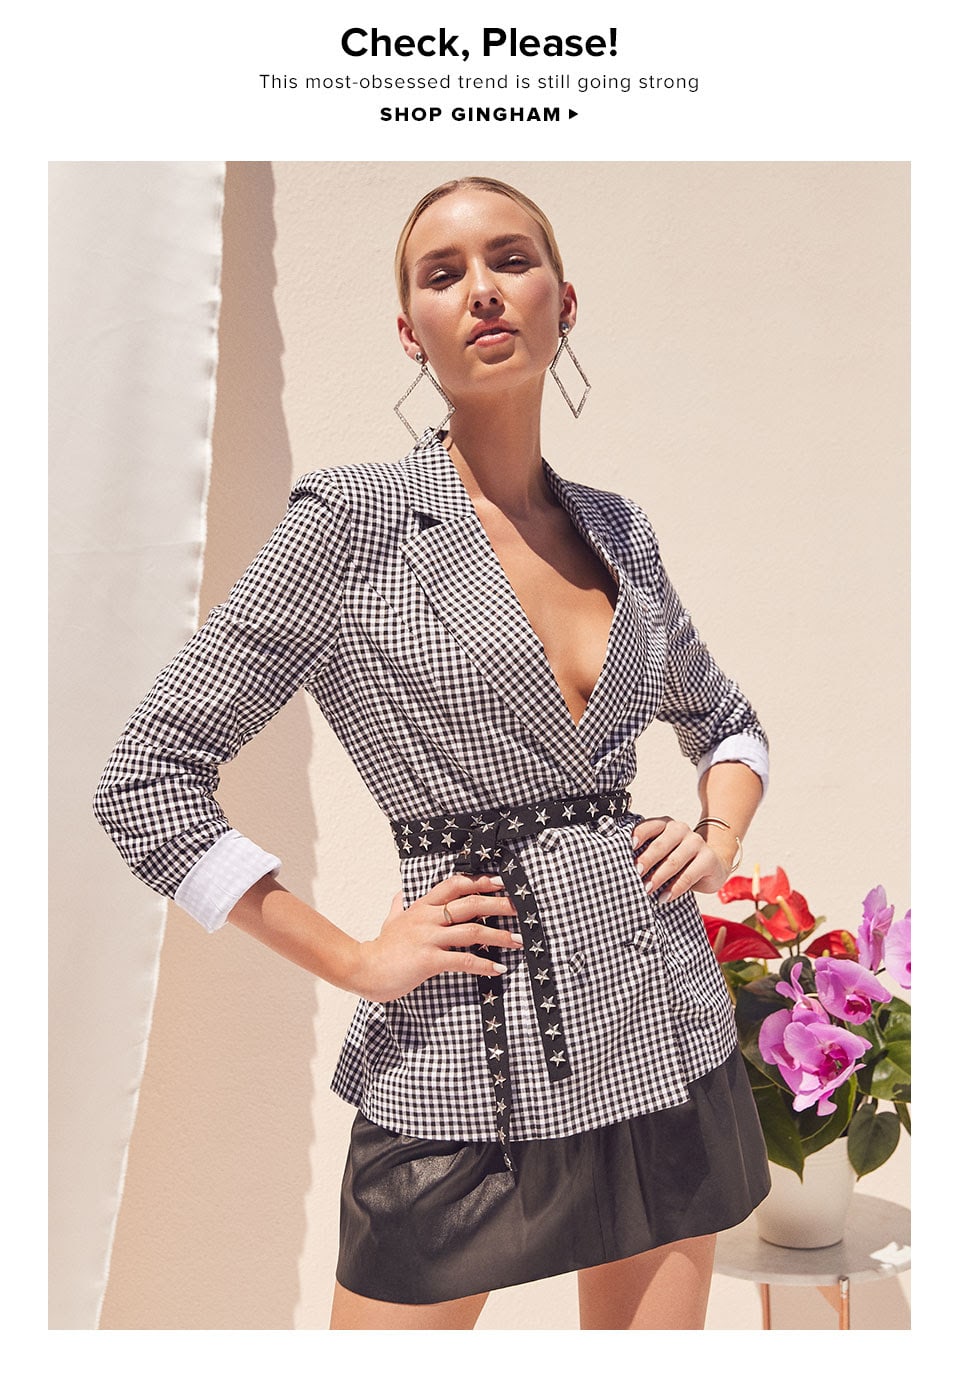 Check, Please! This most-obsessed trend is still going strong. Shop Gingham.